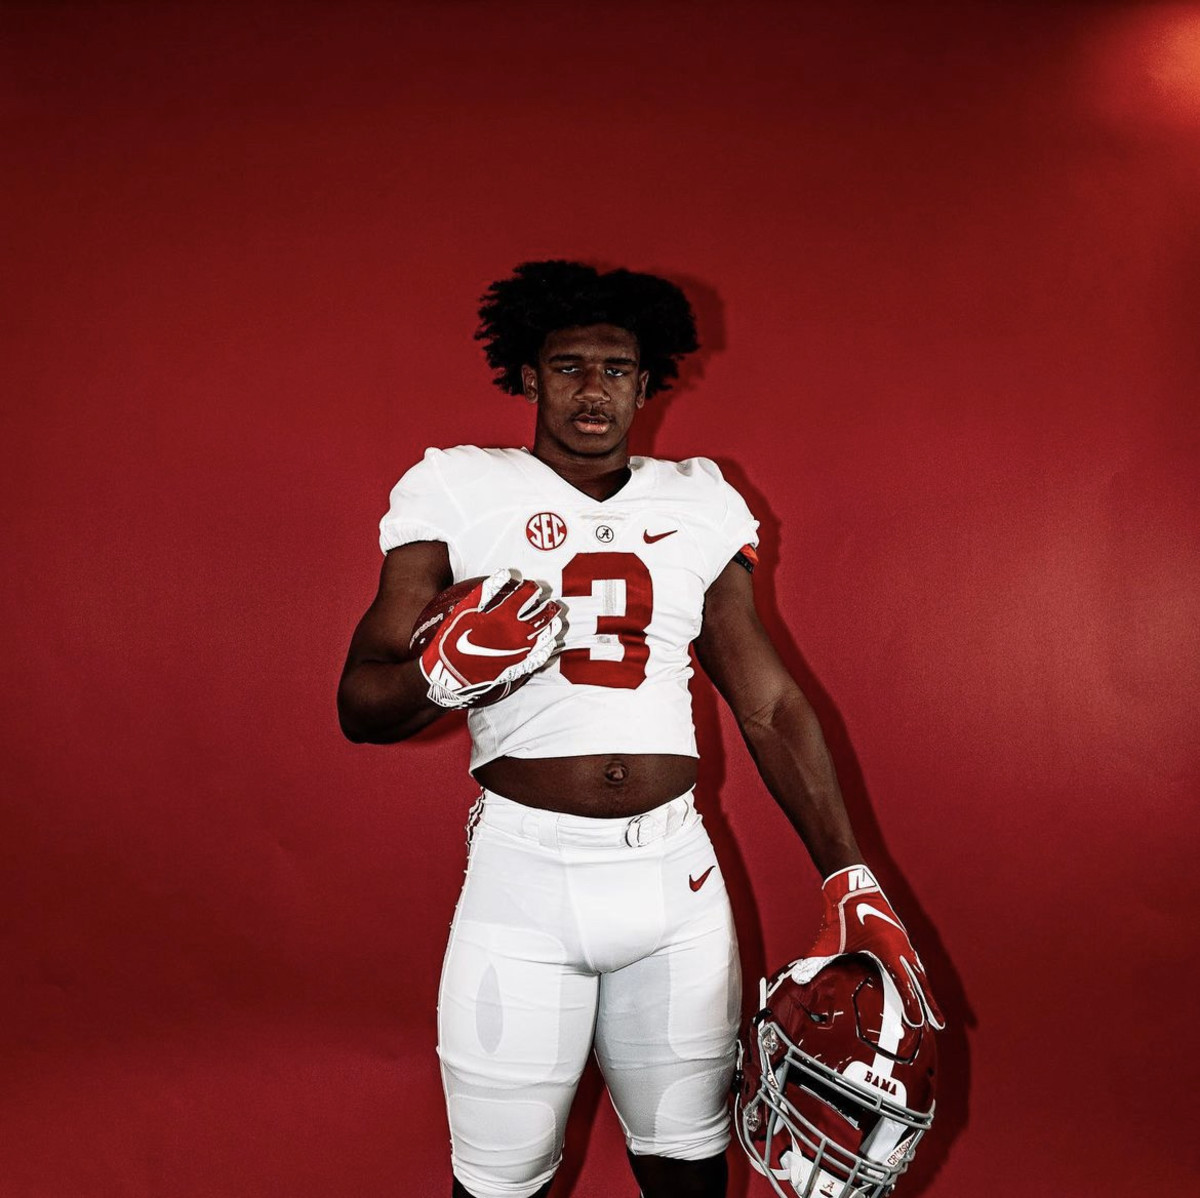 2024 4-star RB Daniel Hill during an unofficial visit to Alabama. (Photo courtesy of Daniel Hill)